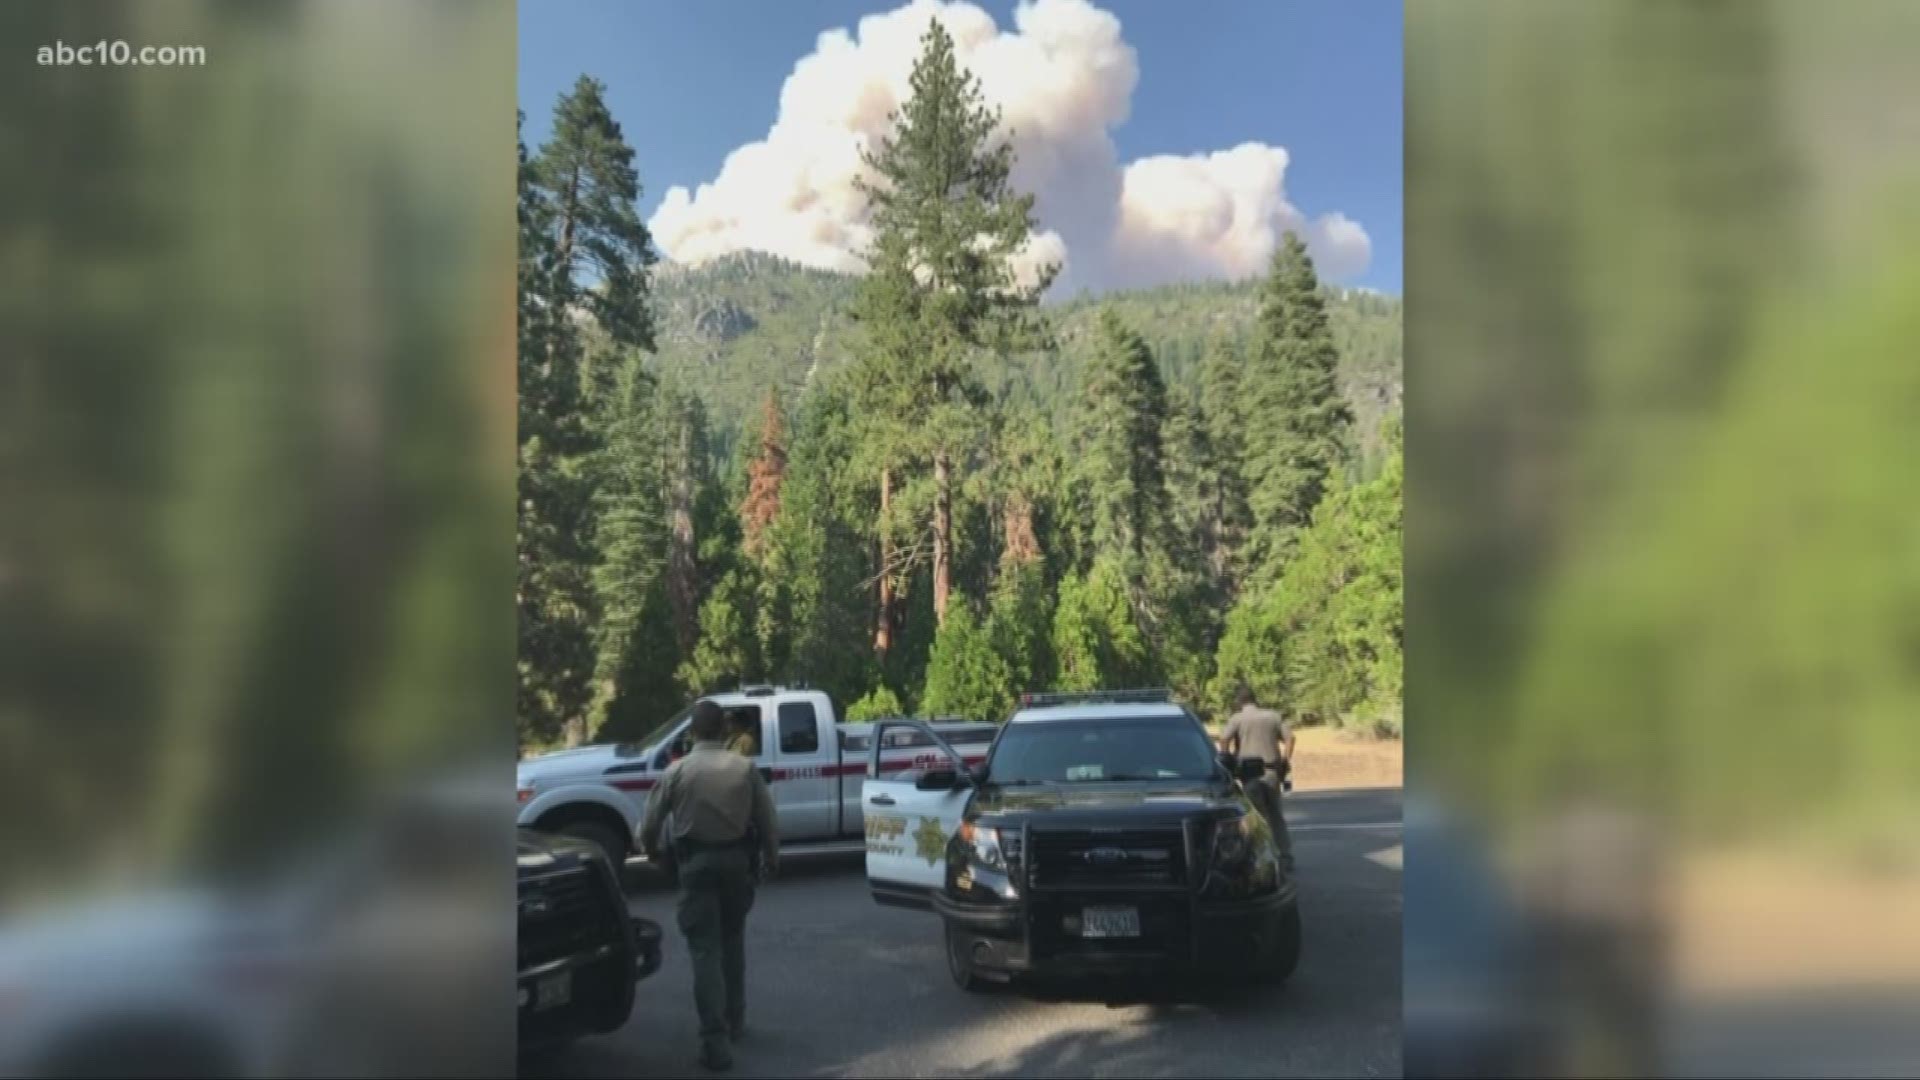 The Donnell Fire in Tuolumne County has grown to an estimated 6,000 acres, according to the Tuolumne County Sheriff's Department.